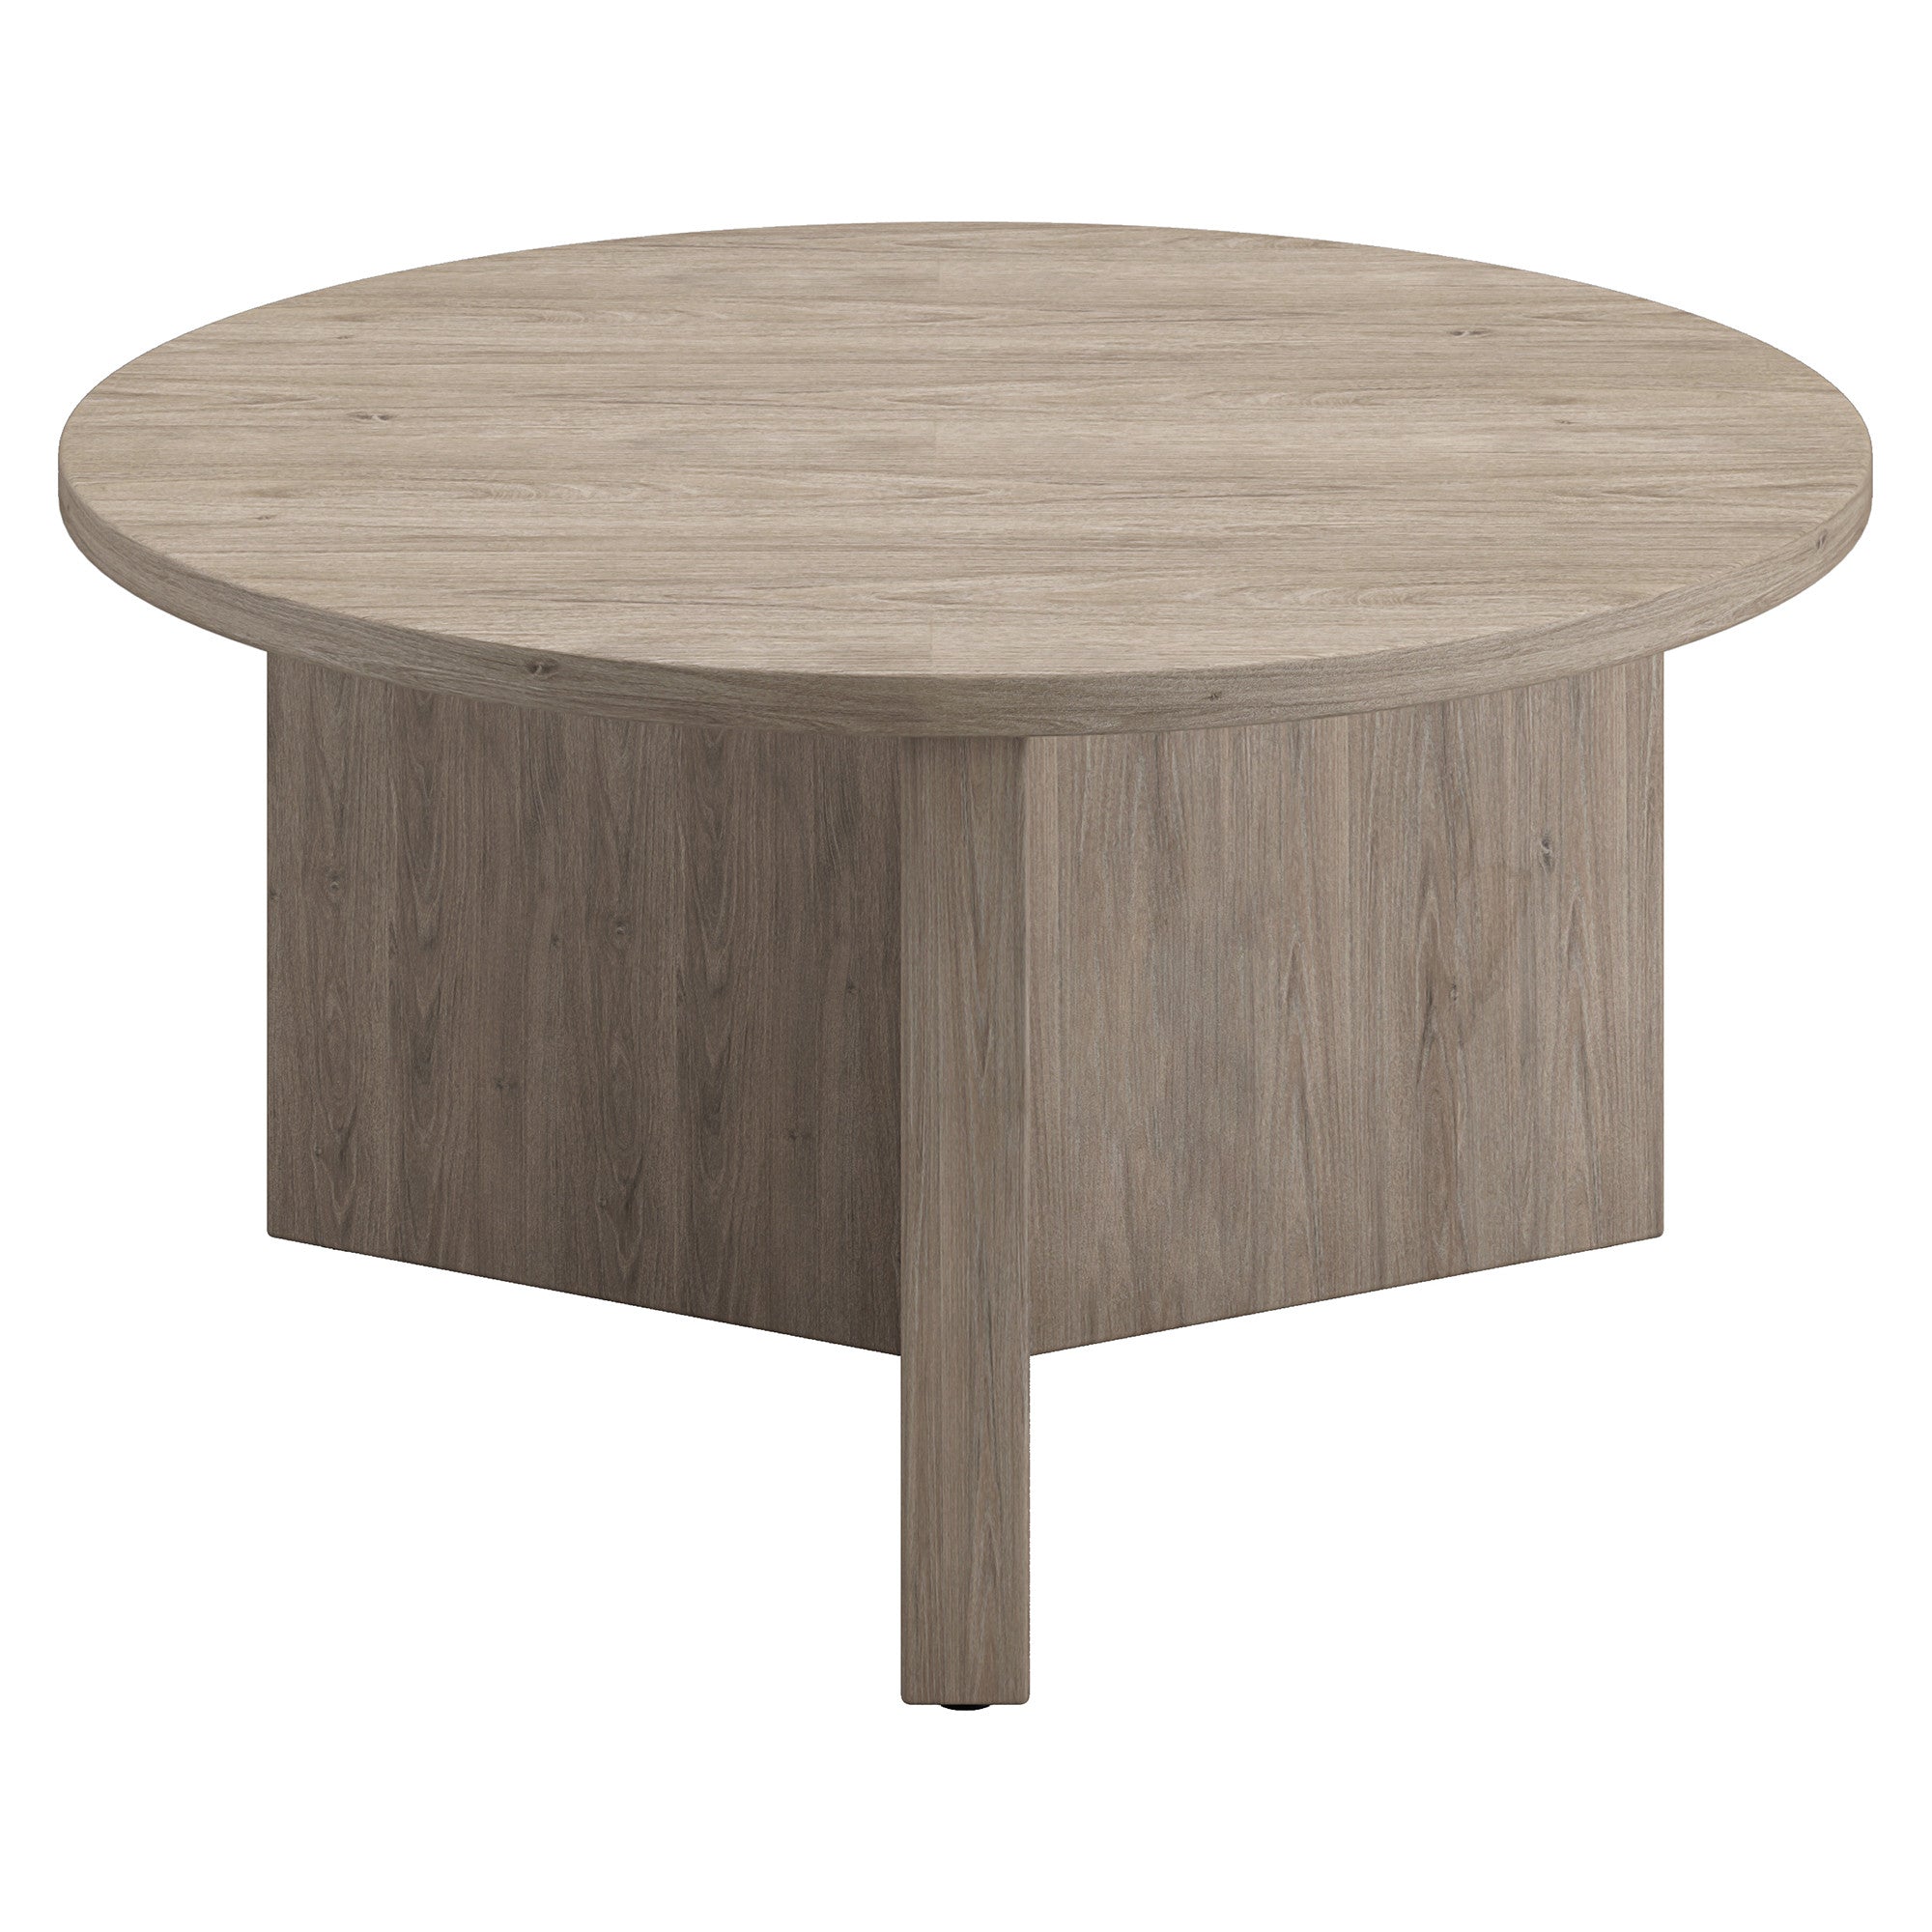 32" Gray Round Coffee Table